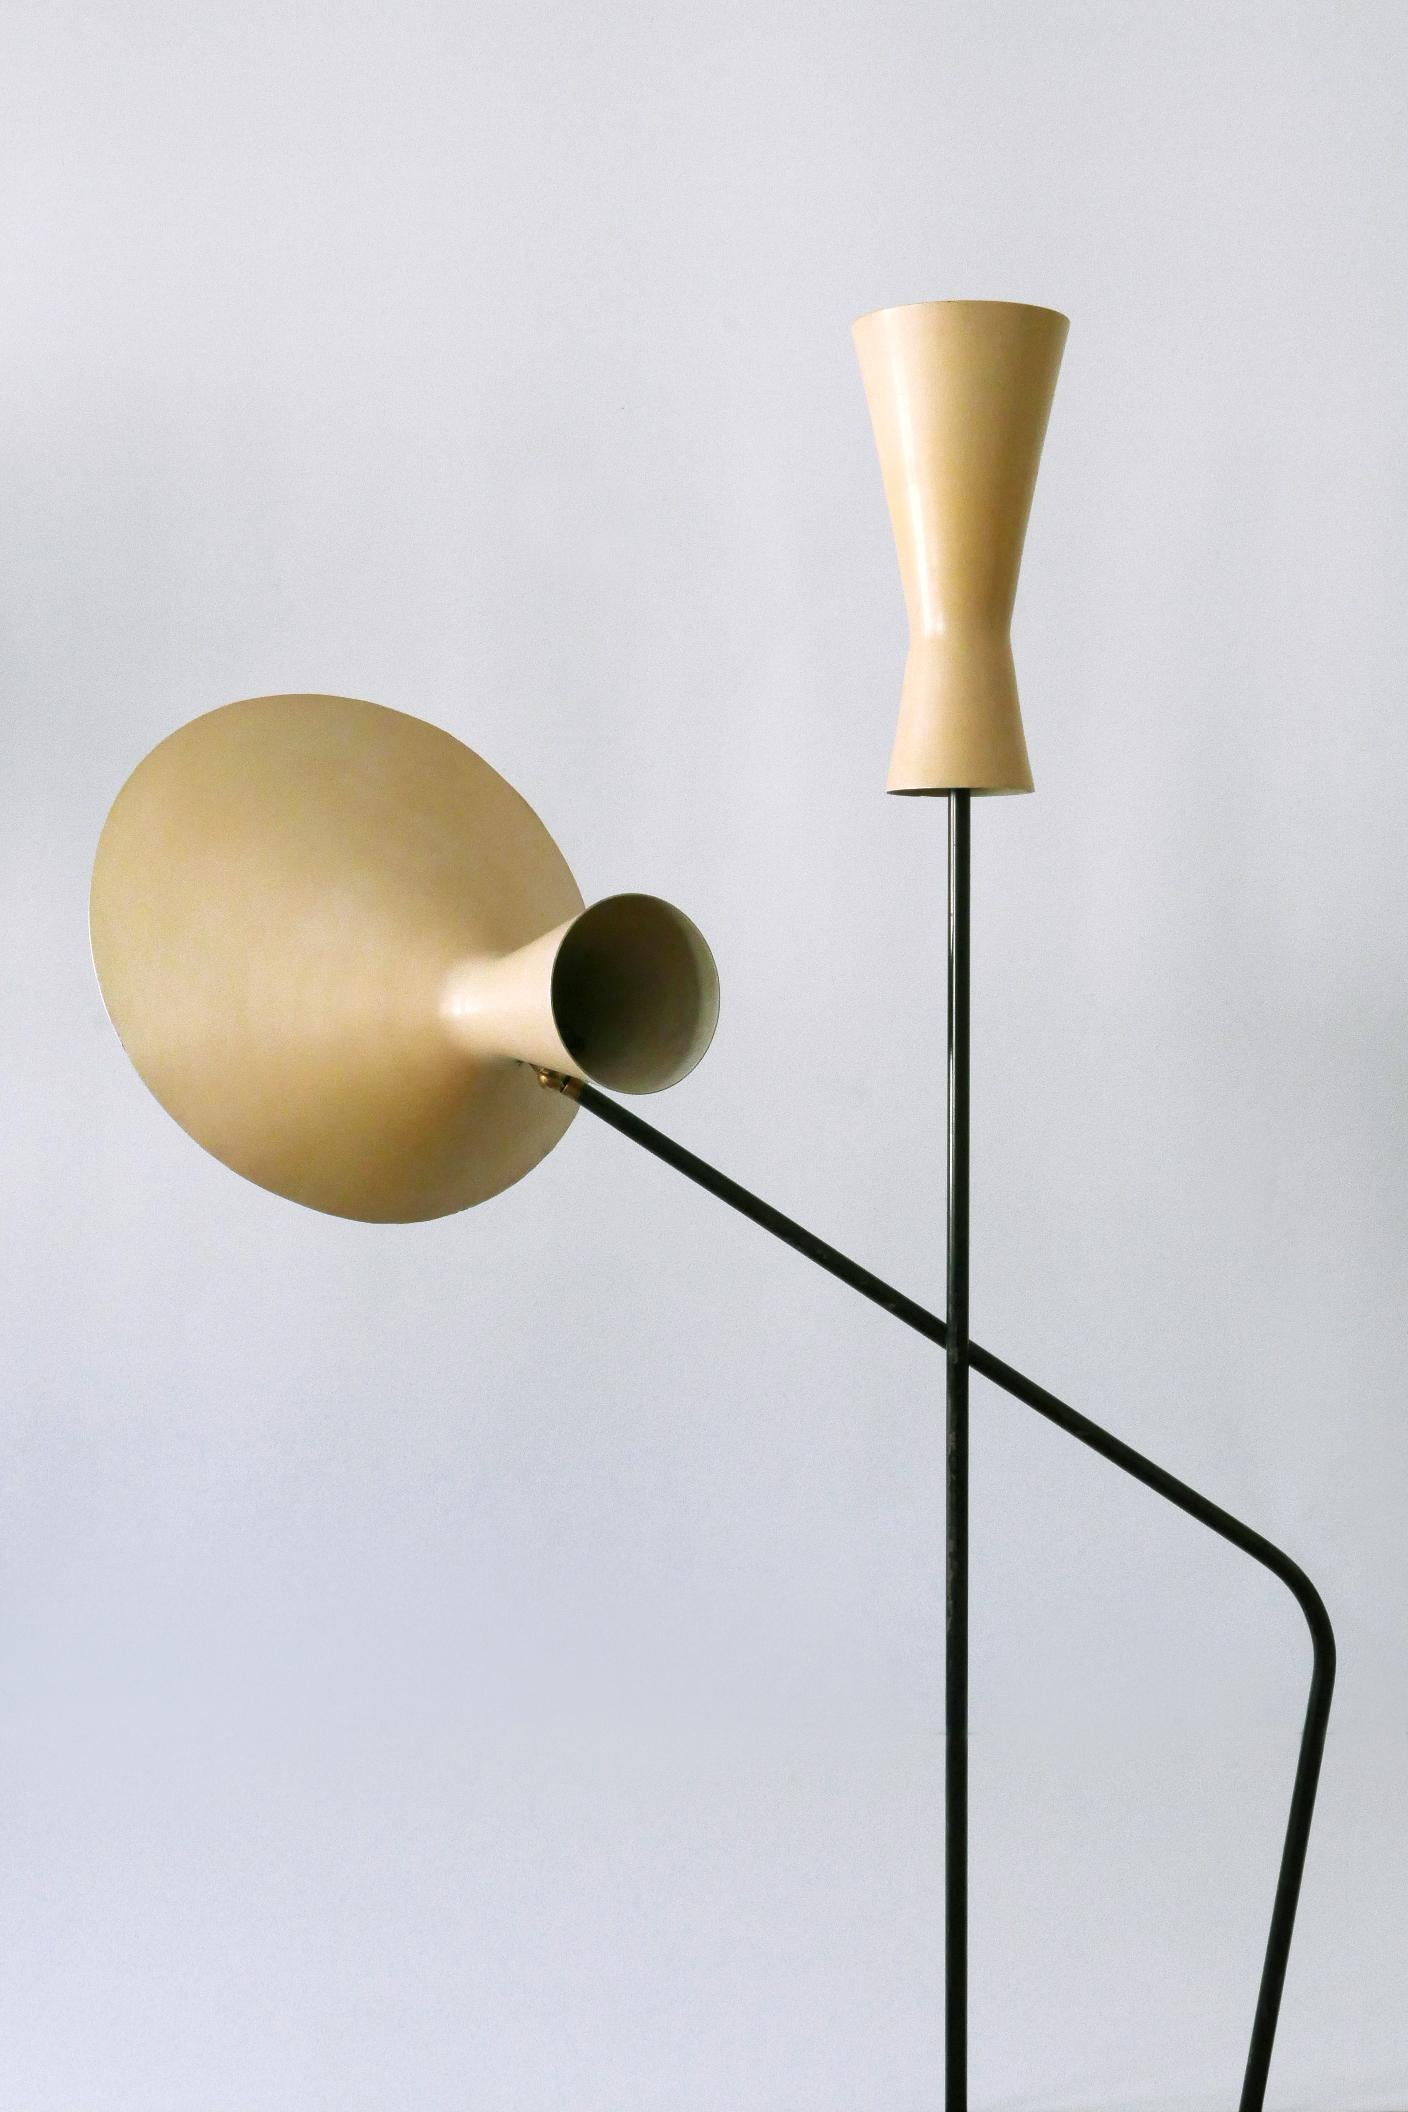 Aluminum Rare Iconic Mid-Century Modern Floor Lamp by Prof. Carl Moor for BAG Turgi 1950s For Sale